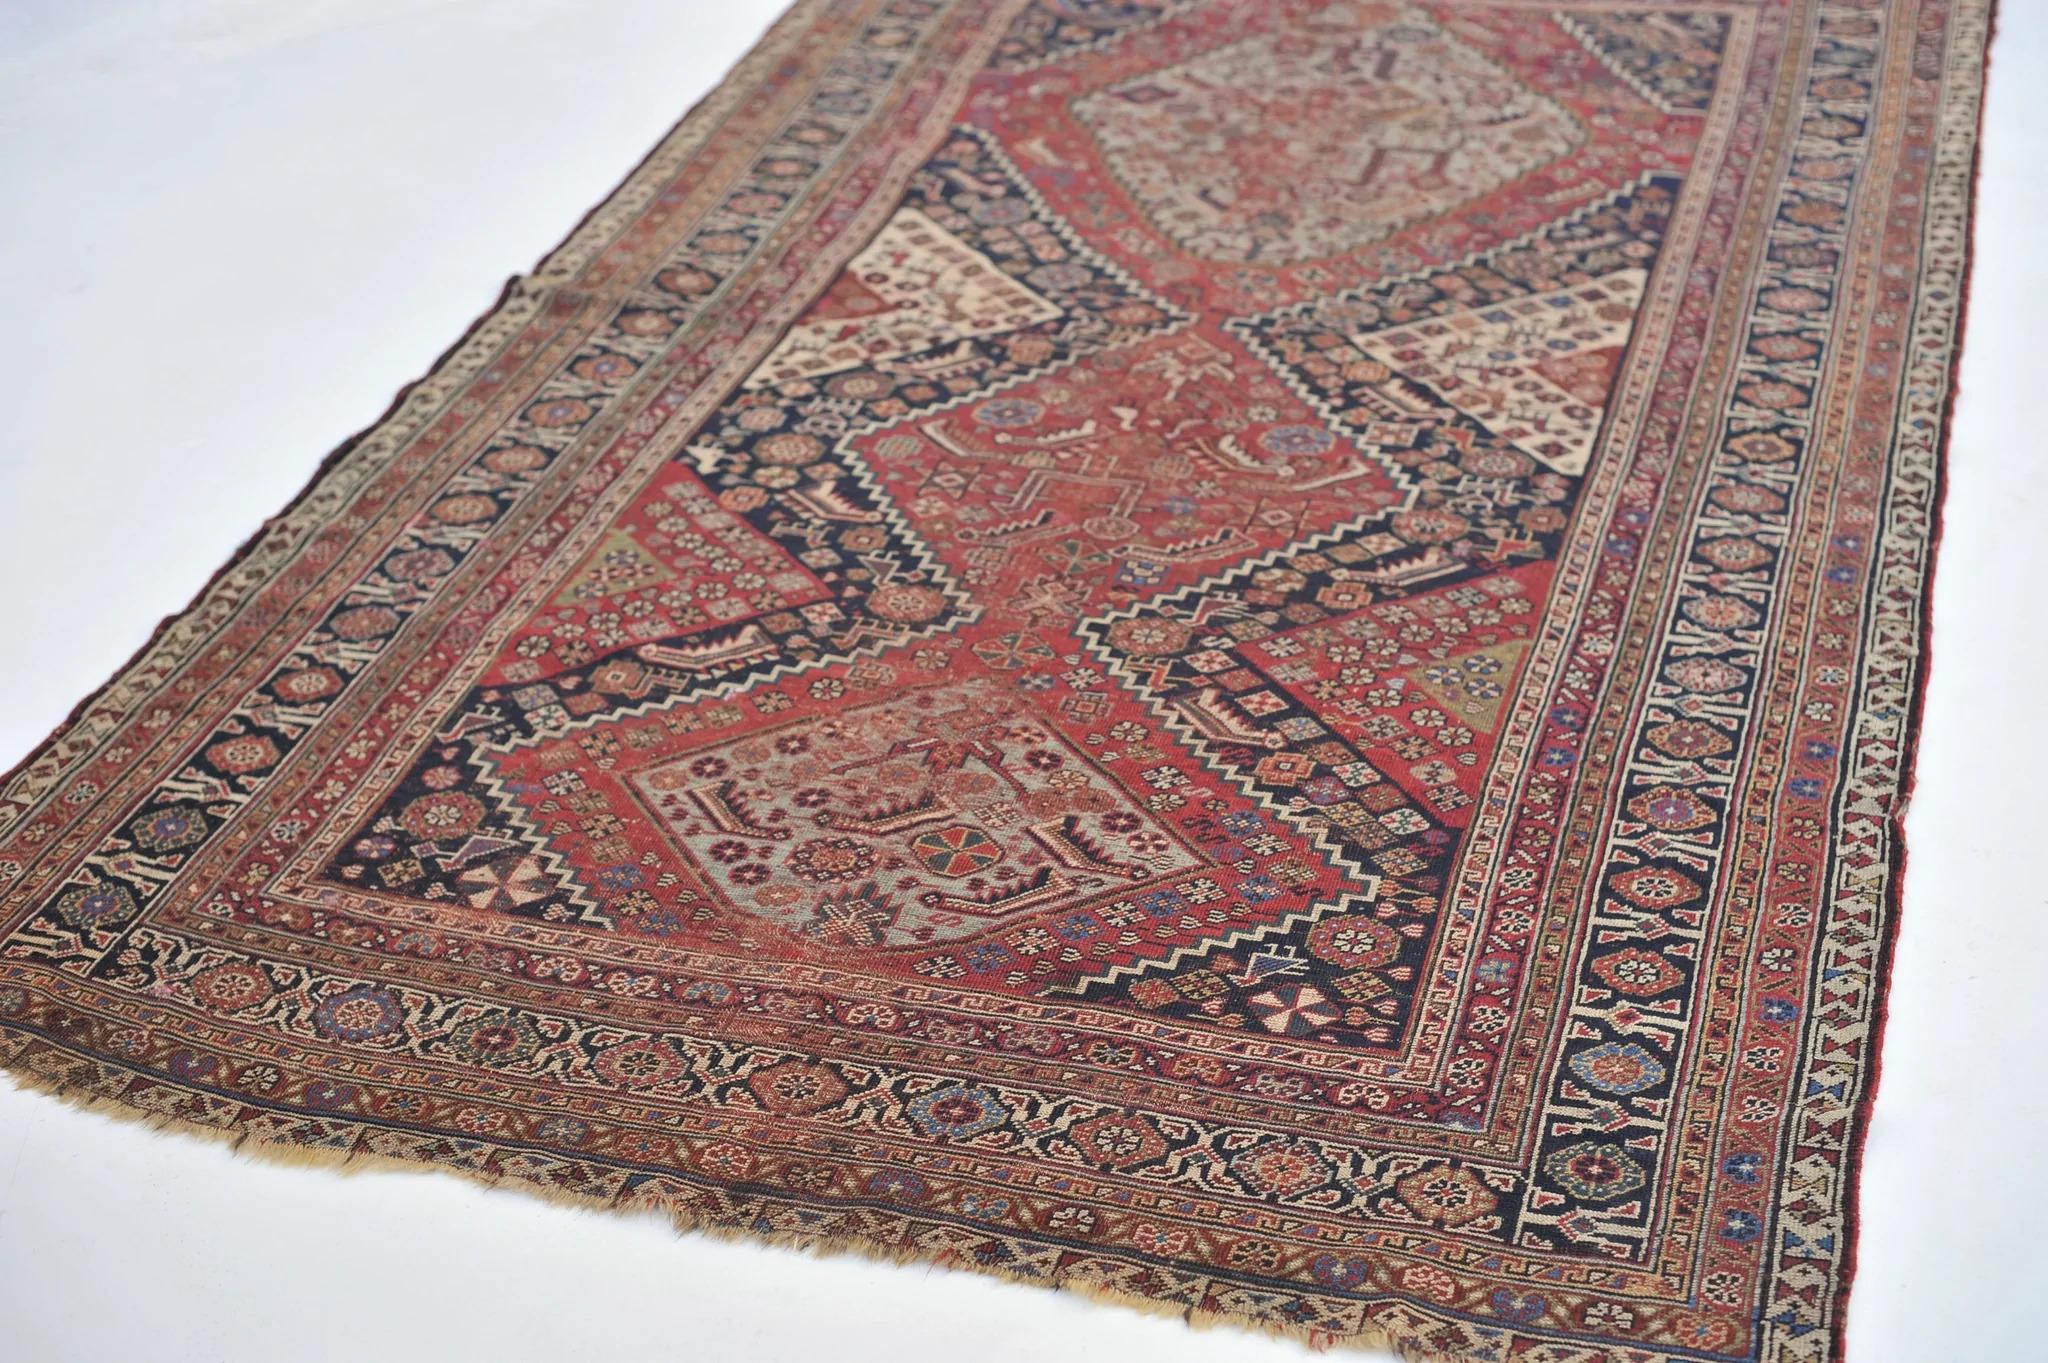 Oliver Timeless Antique Nomadic Village Rug

About: Known for one of the most spontaneous weavers ever, these nomads herd their own sheep, feed them well, make sure their environment is pristine, and basically treat them as family, as they are, for